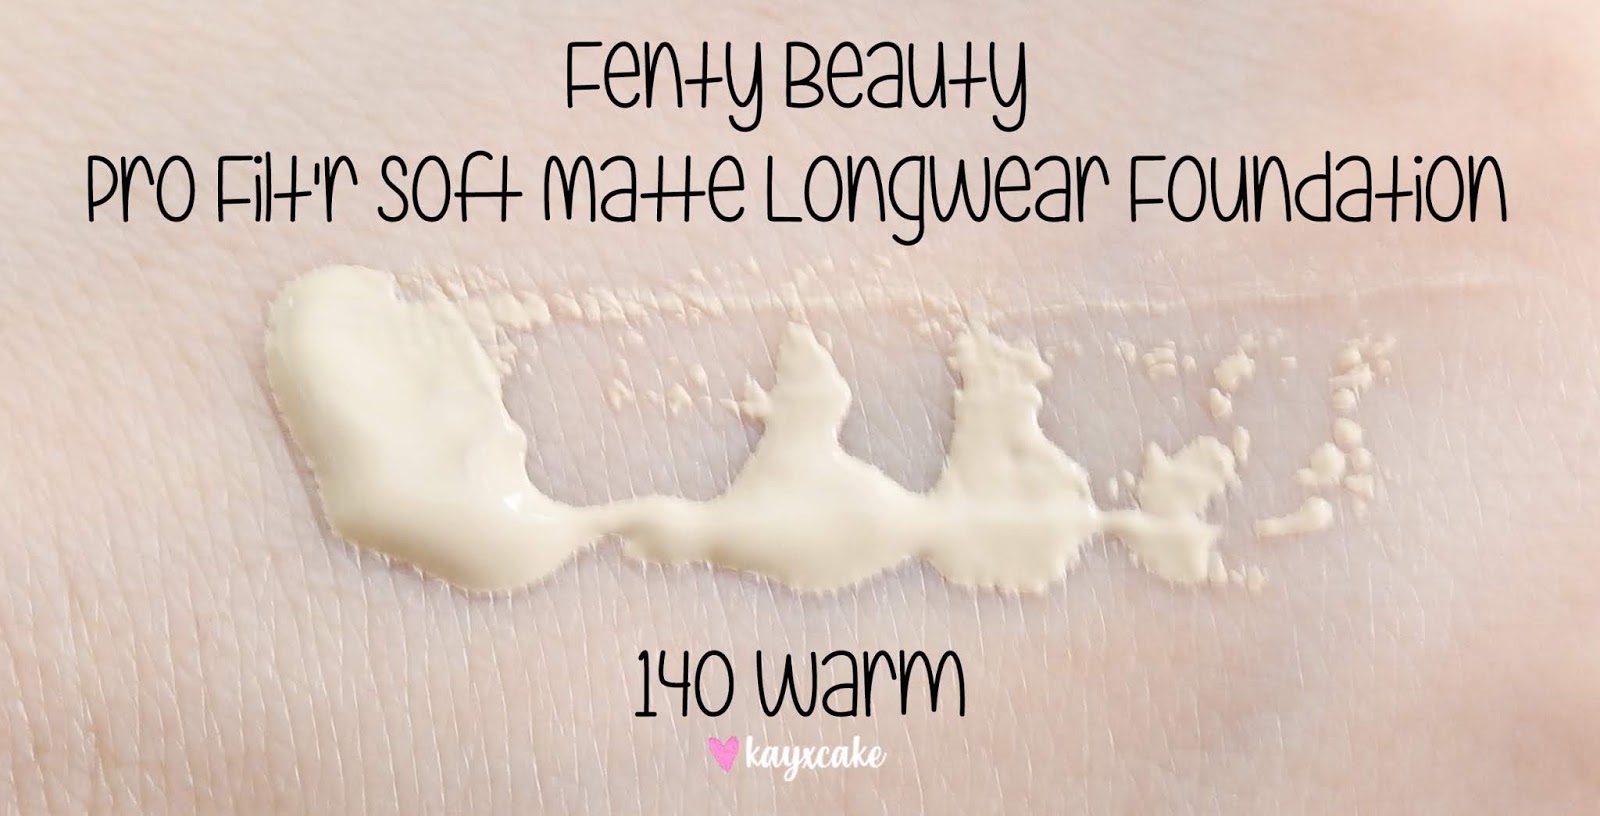 to continue different Mainstream Kay Cake Beauty: Fenty Beauty Pro Filt'r Soft Matte Longwear Foundation ♡ # 140 Warm - Review on Oily Skin!